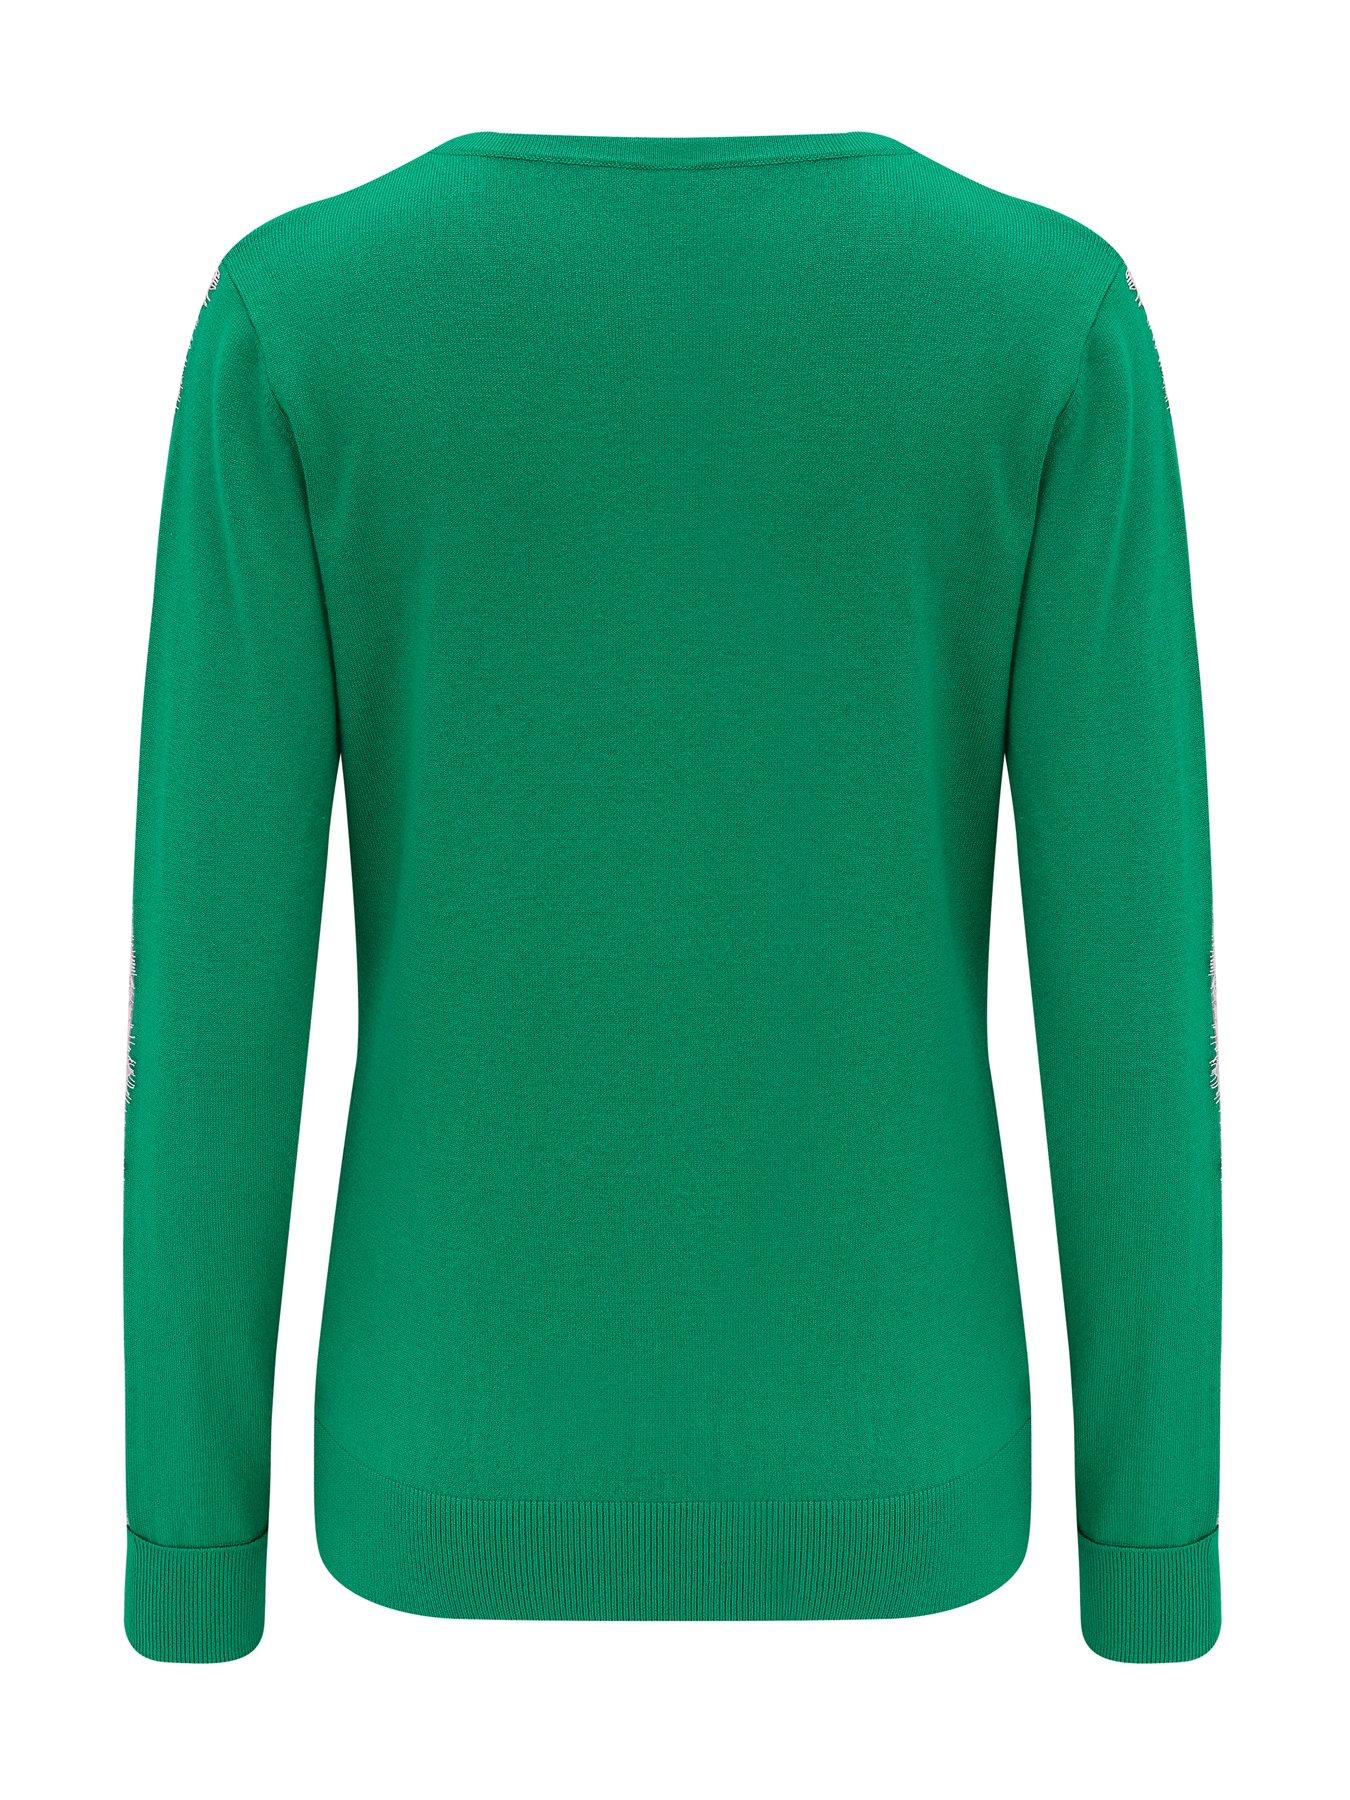  Lace Sleeve Insert Knit Jumper - Green/Pink